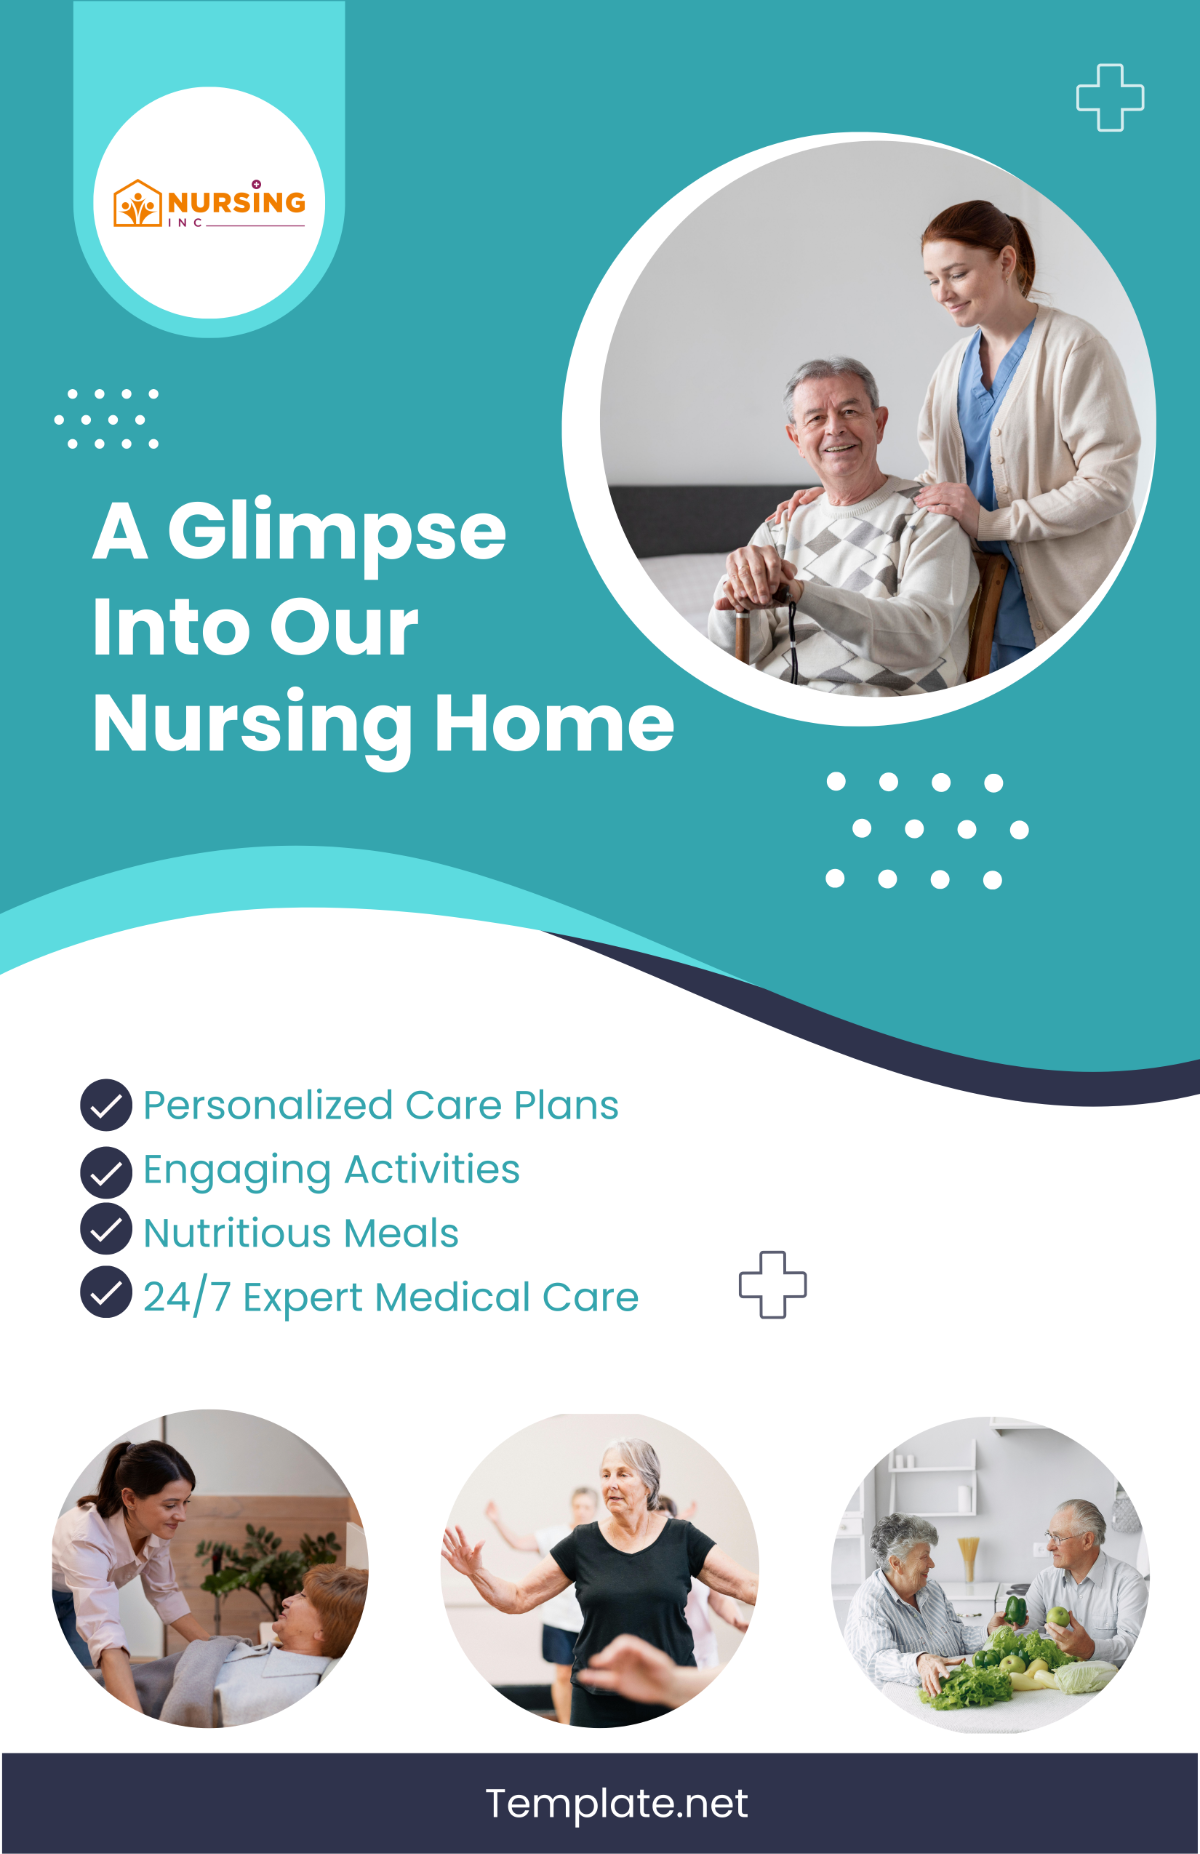 Welcome Home: A Glimpse into Our Nursing Home Poster